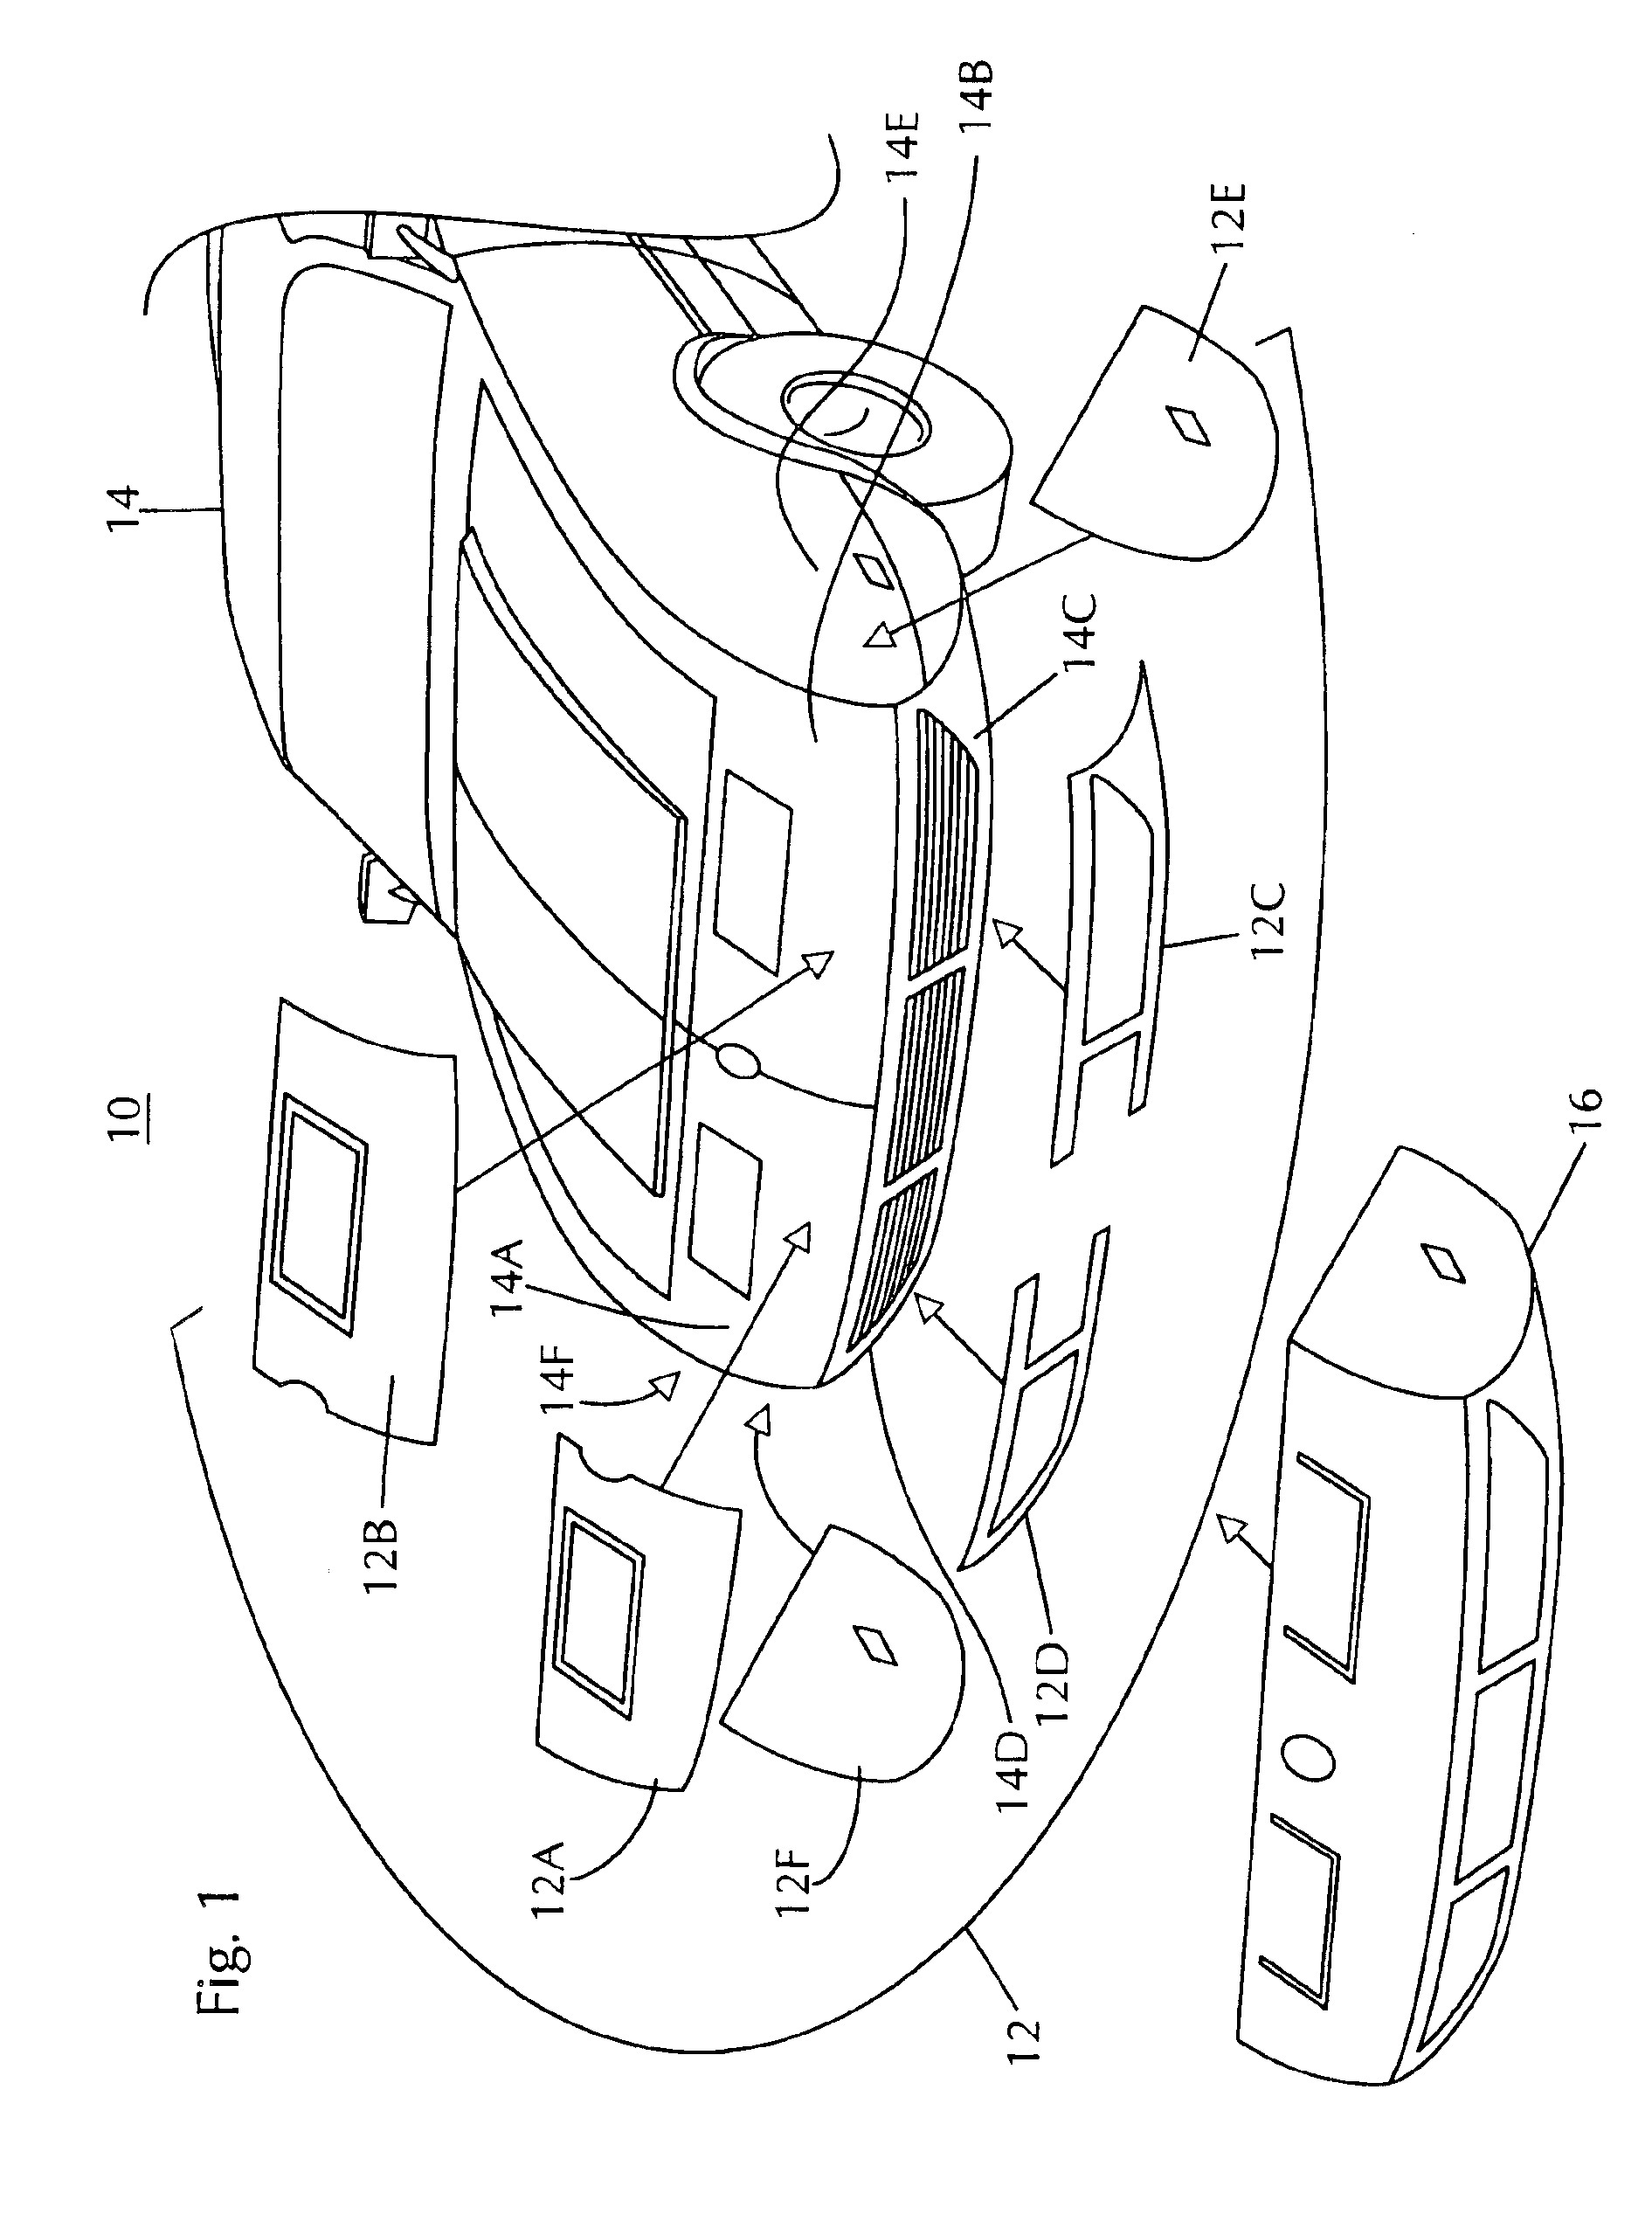 Apparatus and method for protection of a vehicle exterior portion